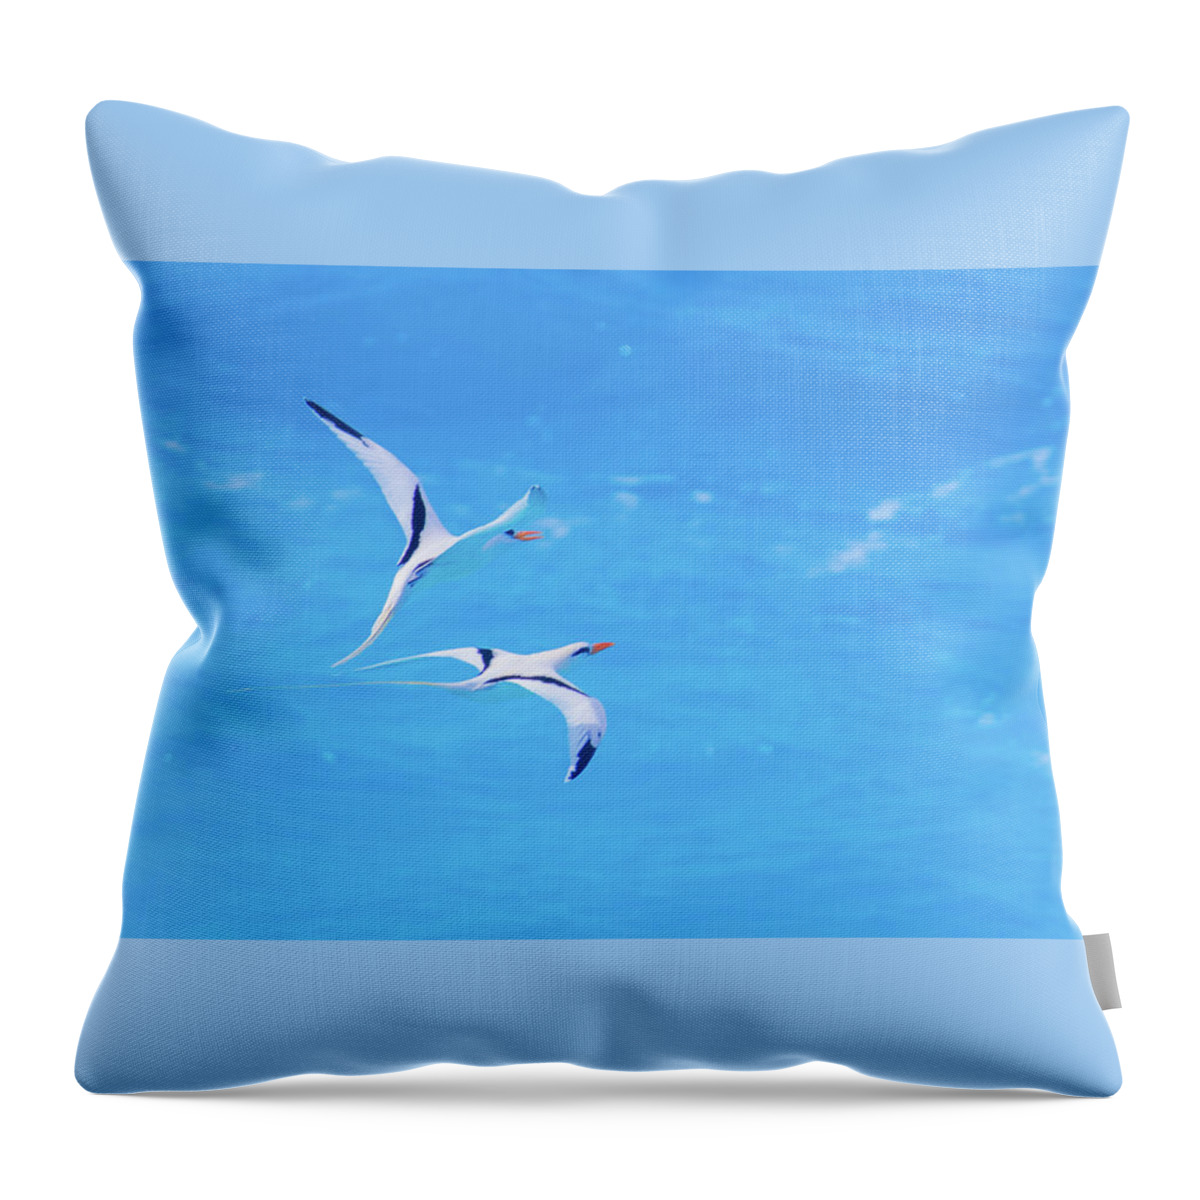 2018 Throw Pillow featuring the photograph Tangential Longtails by Jeff at JSJ Photography